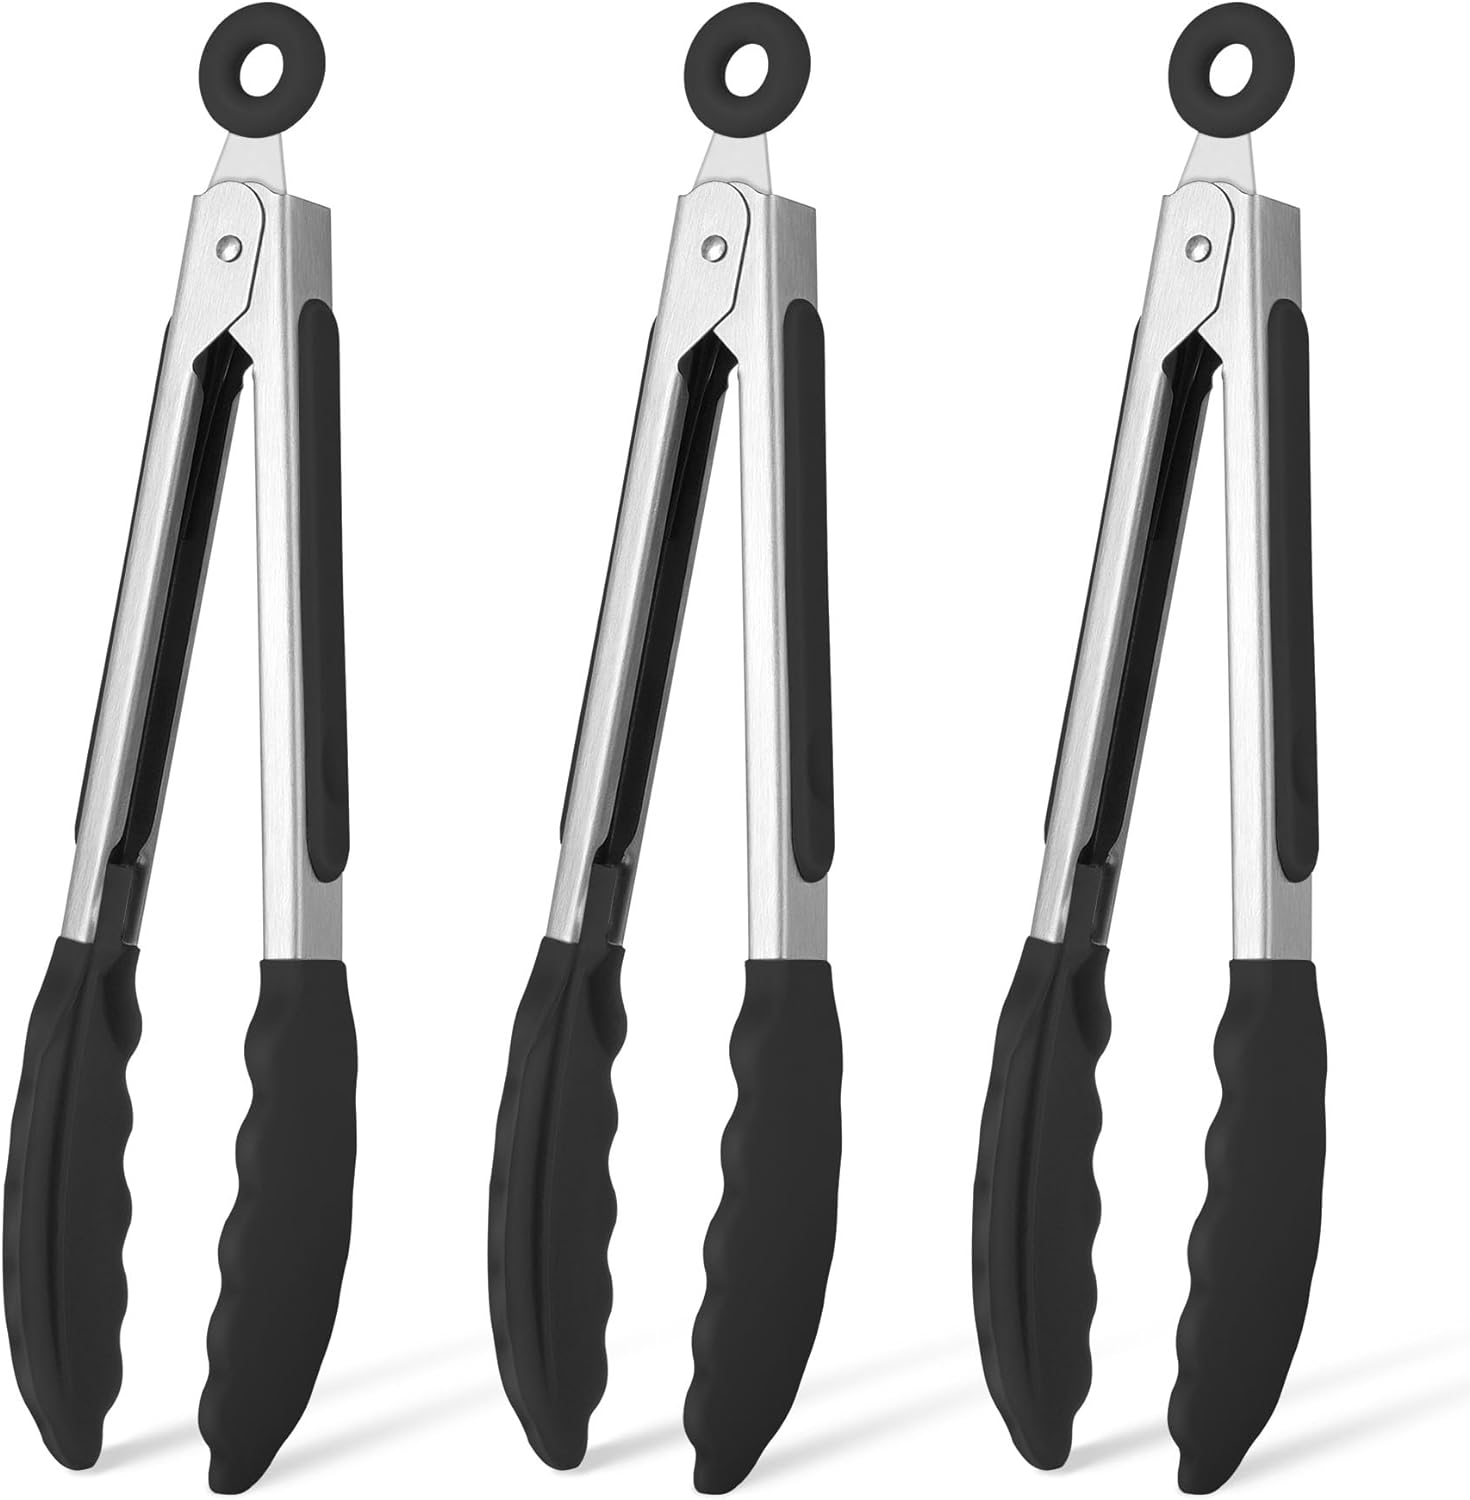 Hotec Mini Silicone Kitchen Tongs for Cooking – 7-Inch Small Serving Tongs with Silicone Tips, Set of 3 (Black)